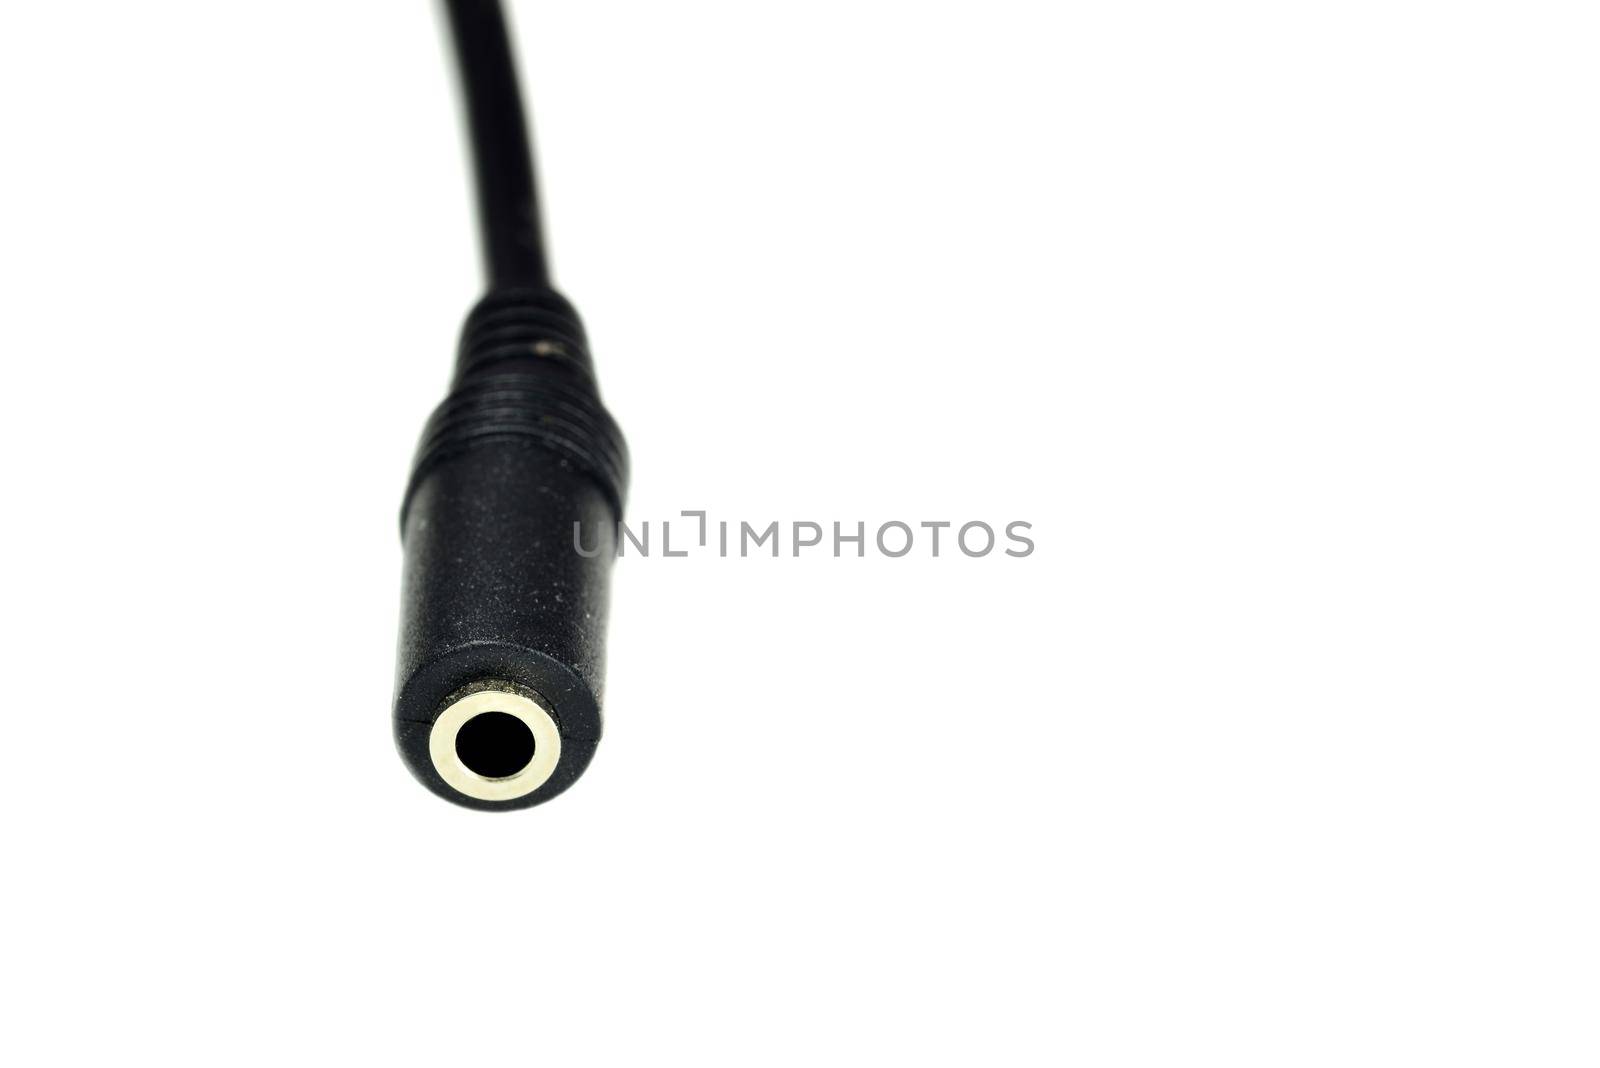 phone jack coupling in a closeup on a white background by Jochen